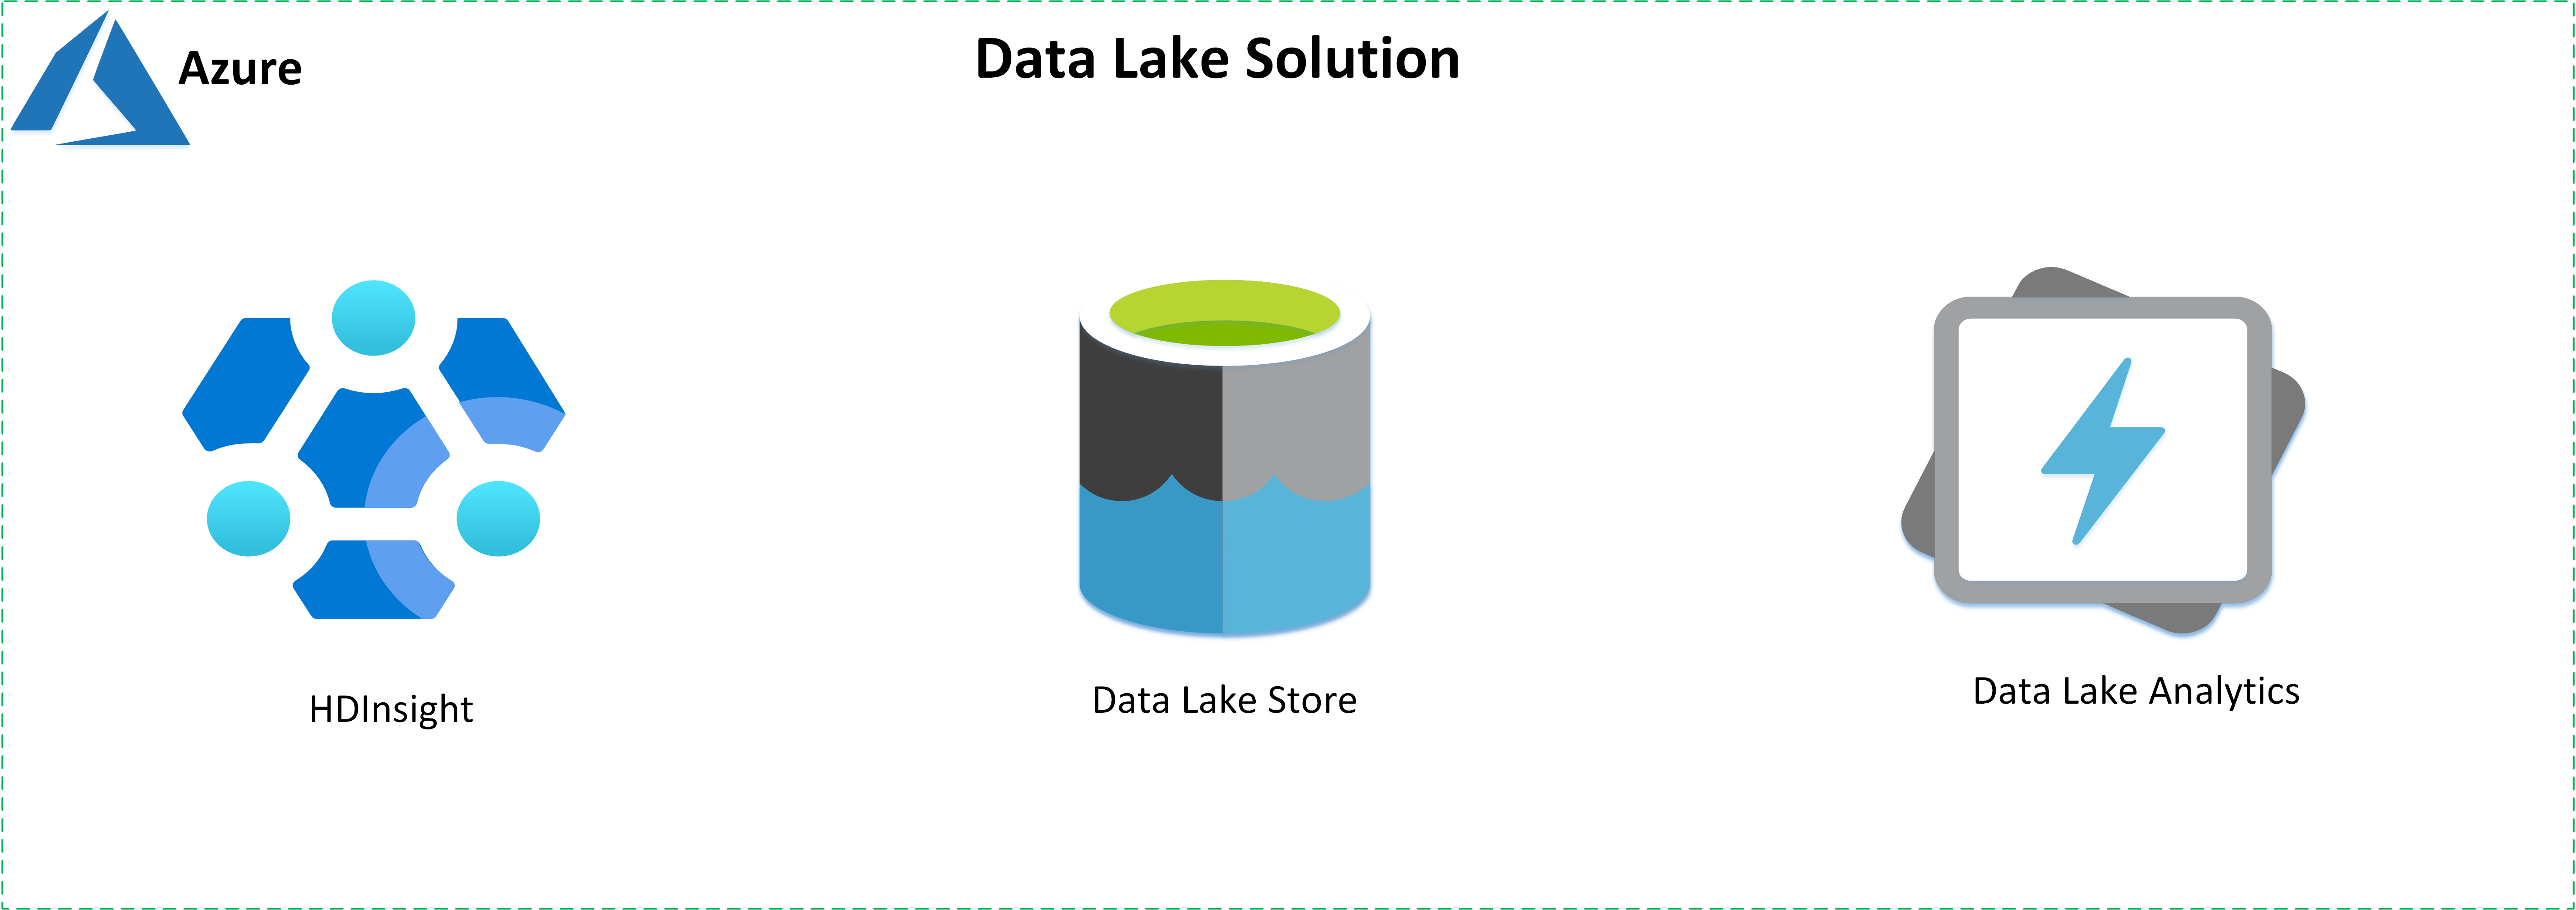 A diagram that shows the key data lake services.